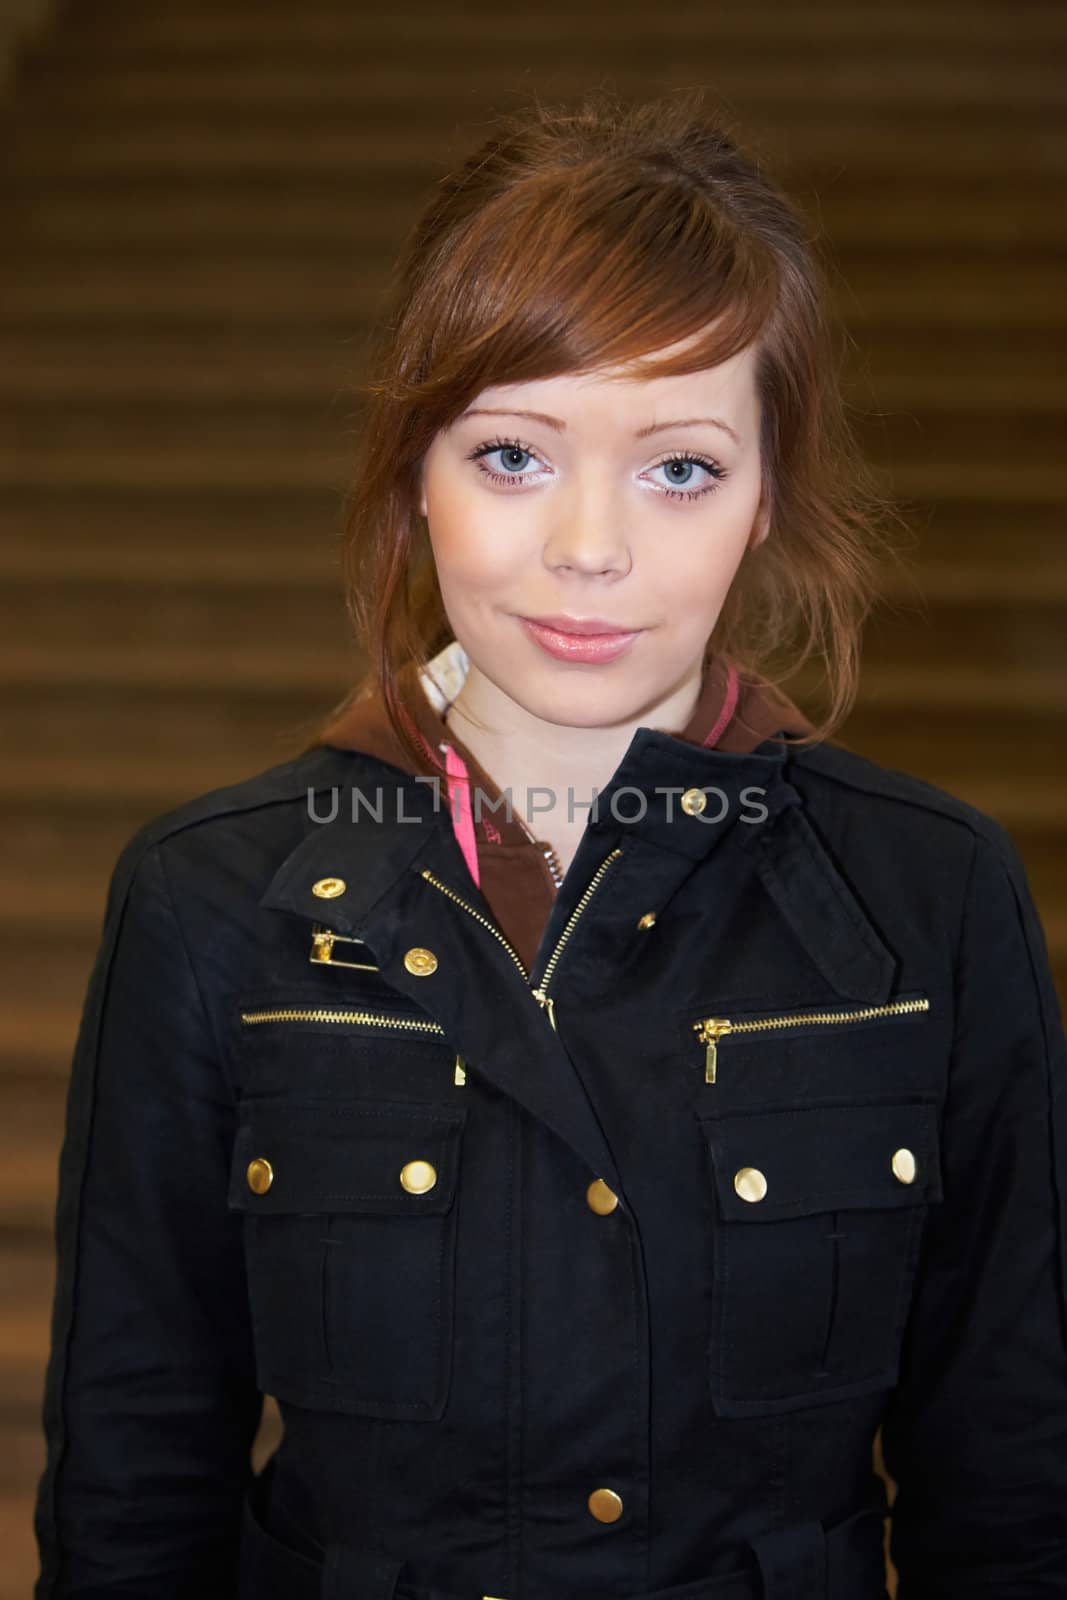 Teenage girl by staircase indoors, looking at camera